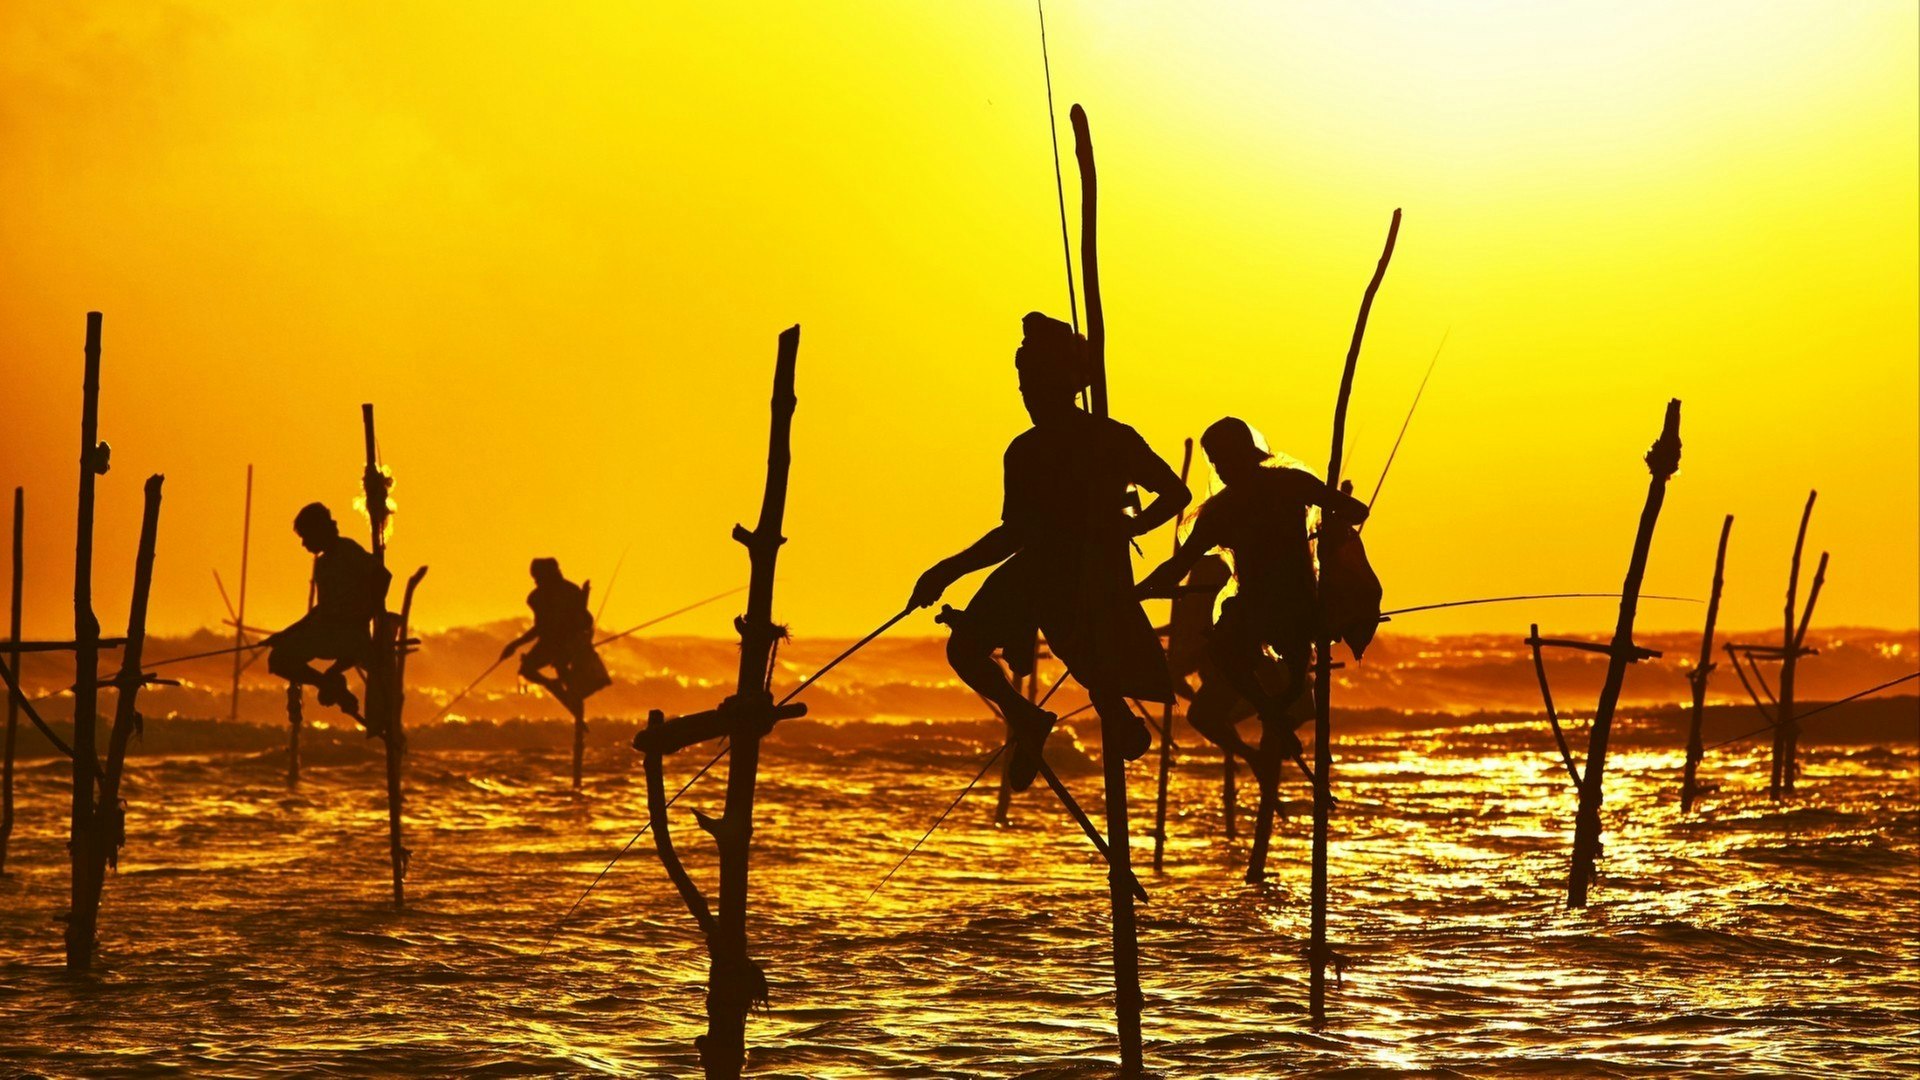 Silhouettes of the traditional fishermen at the sunset near Galle in Sri Lanka